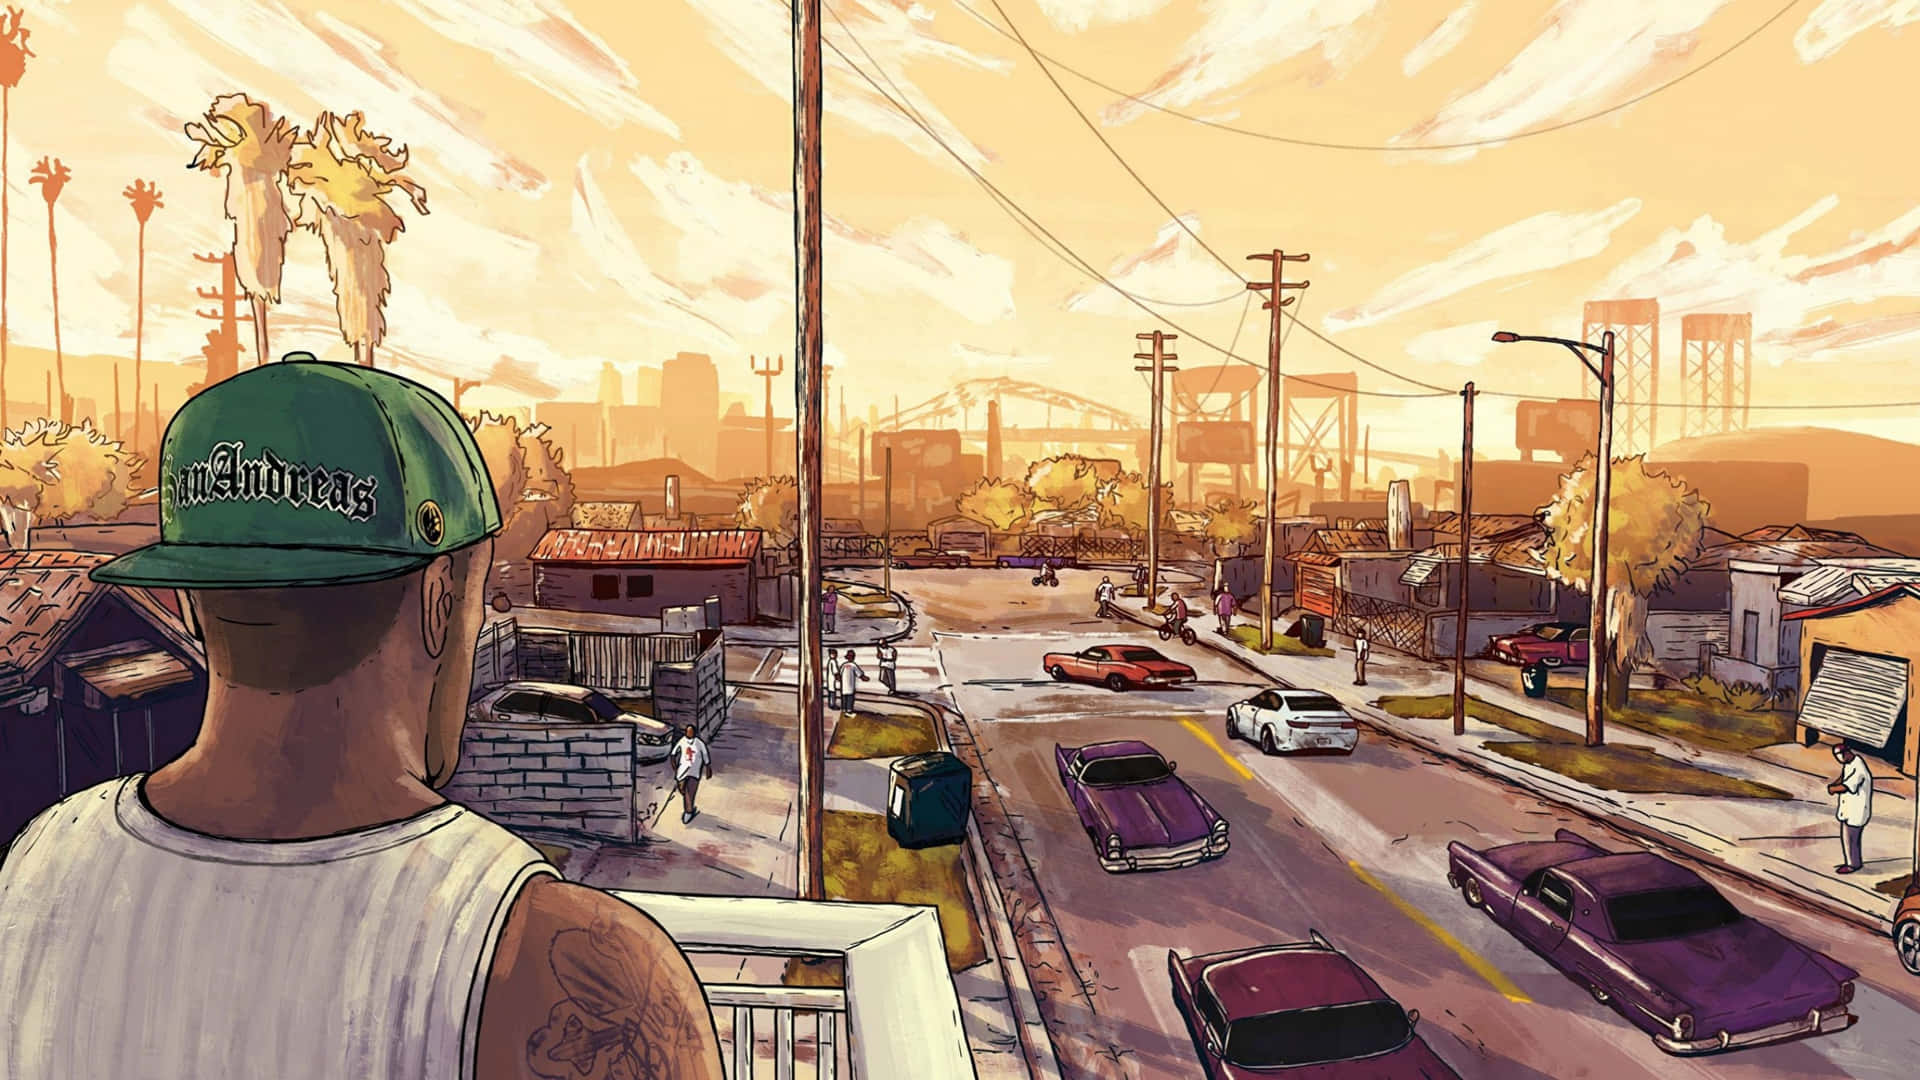 "Explore the world of Los Santos in 2560x1440 resolution with Grand Theft Auto V!" Wallpaper